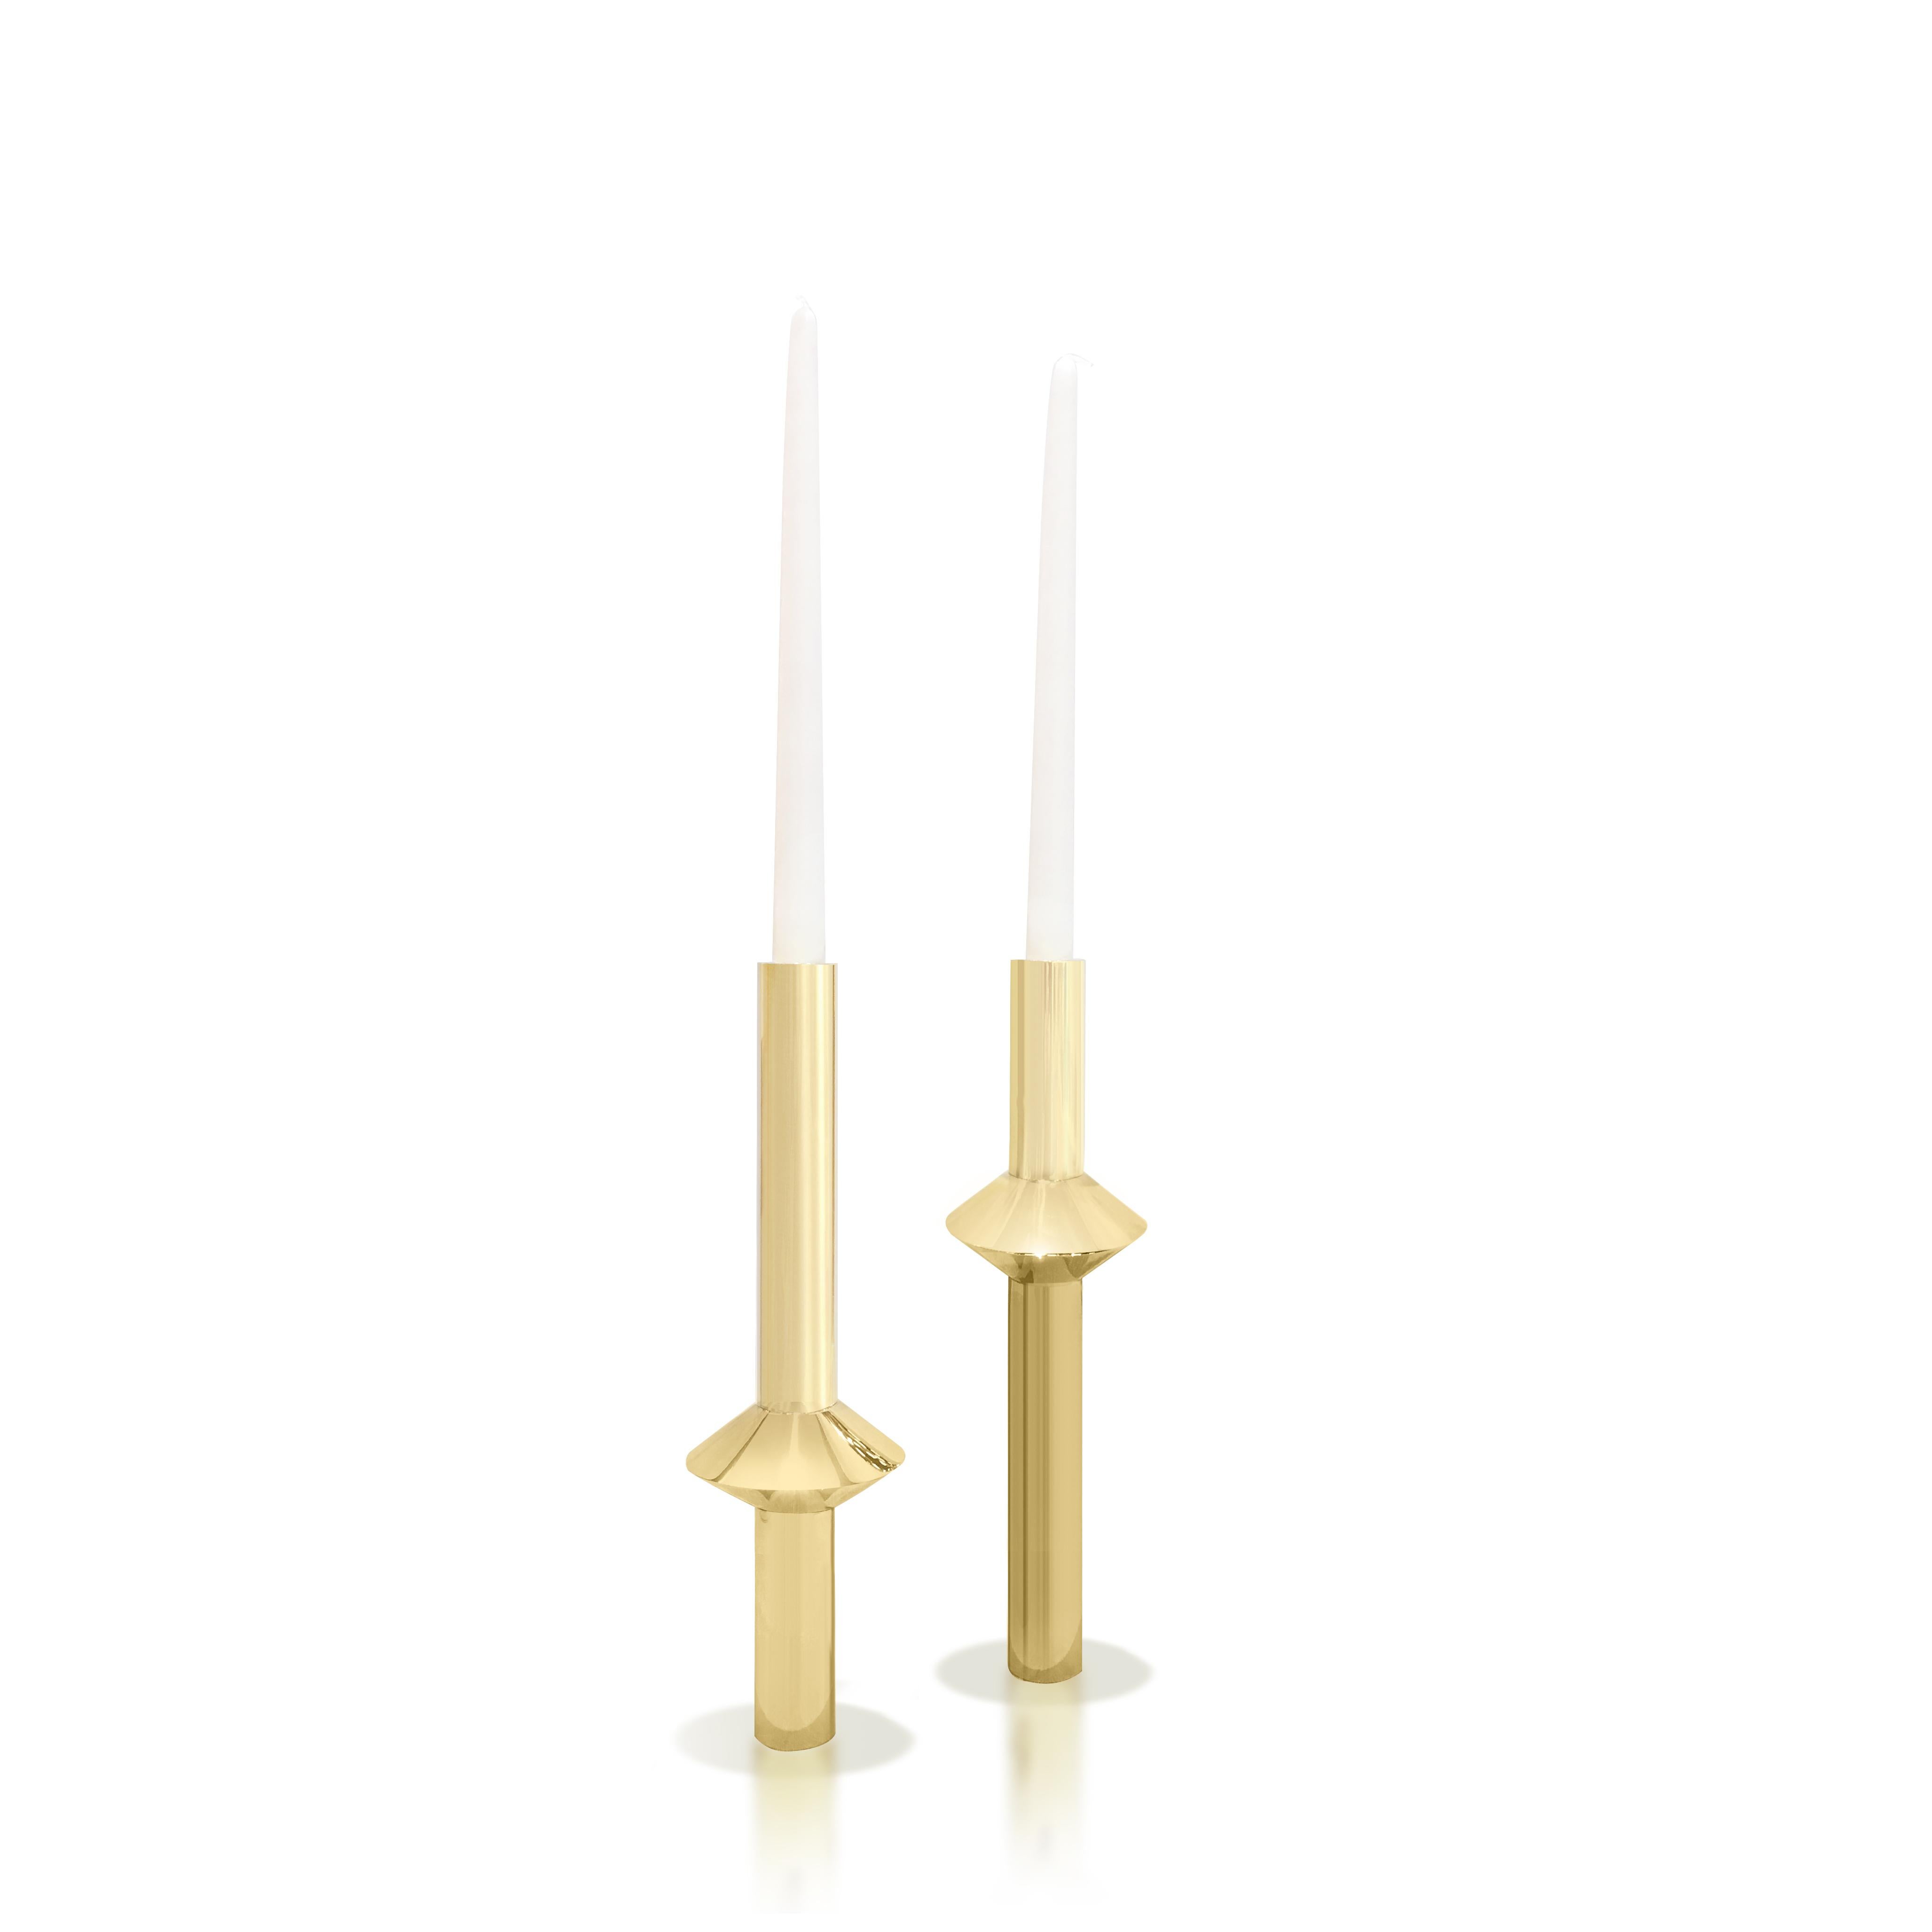 Contemporary Solid Swedish Brass Modern Minimalist Candlesticks In New Condition For Sale In New York, NY